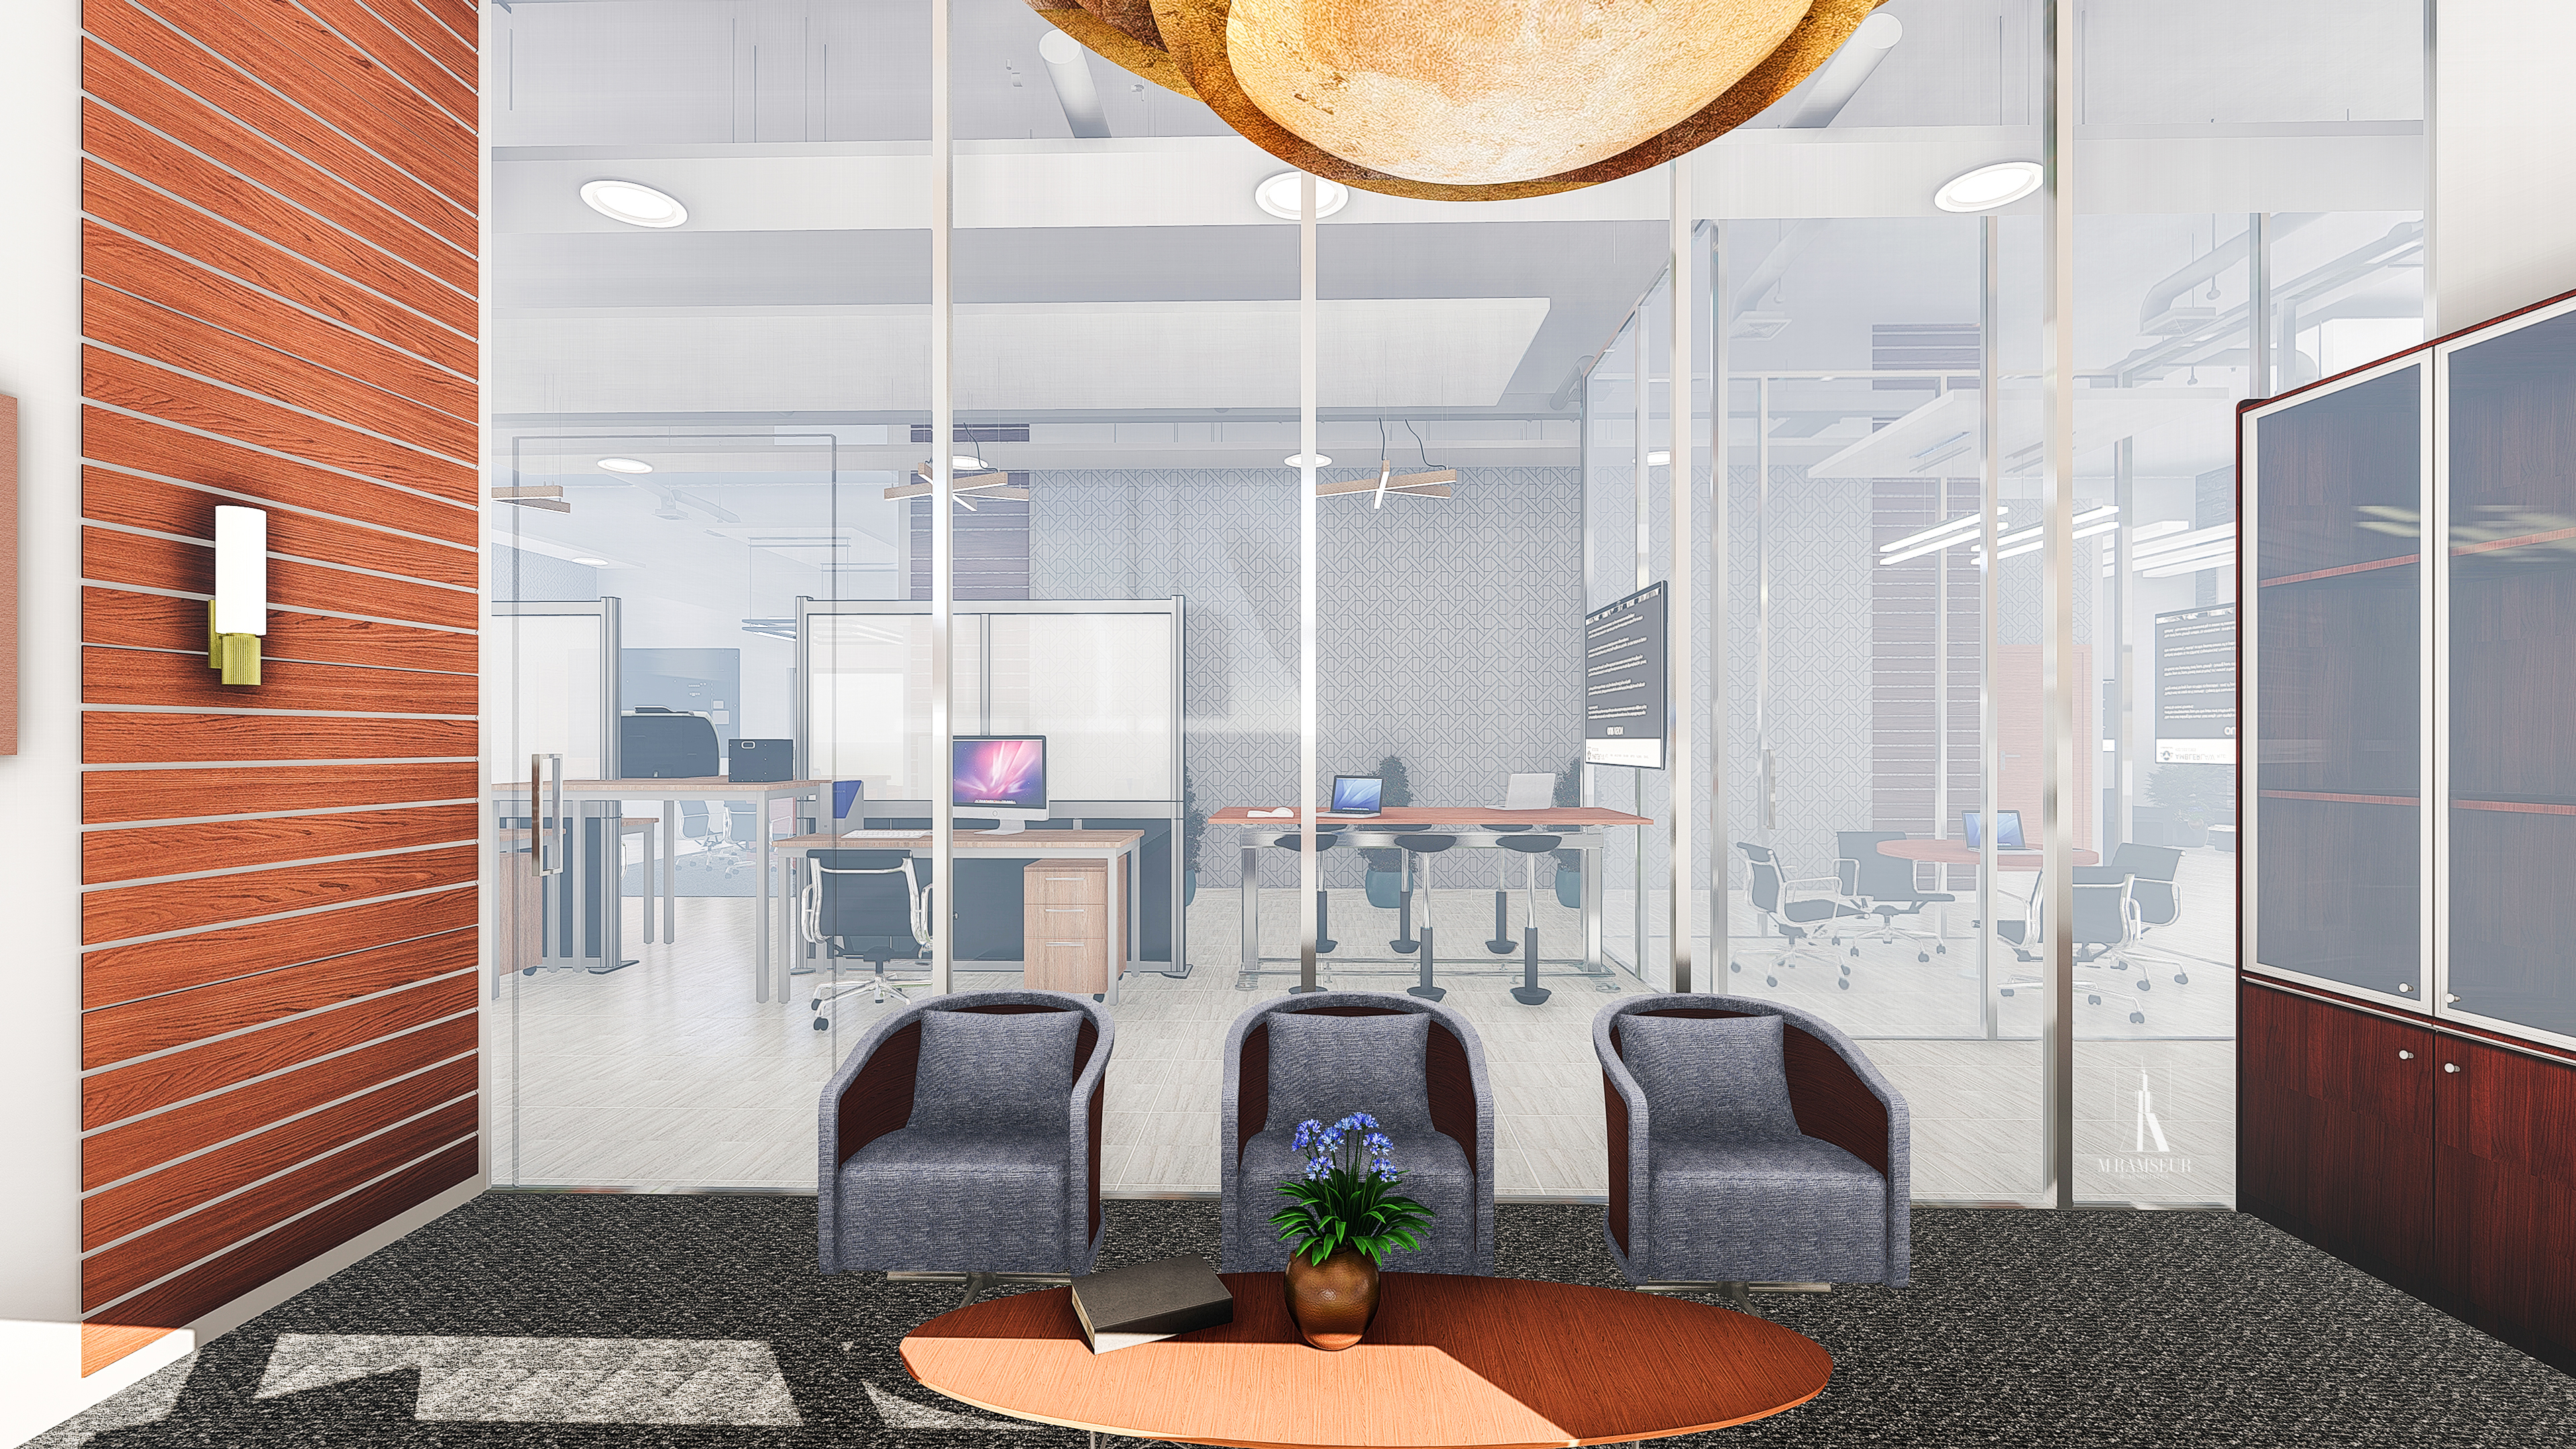 SCHEMATIC DESIGN LAW OFFICE CONCEPT OFFICE RENDERING